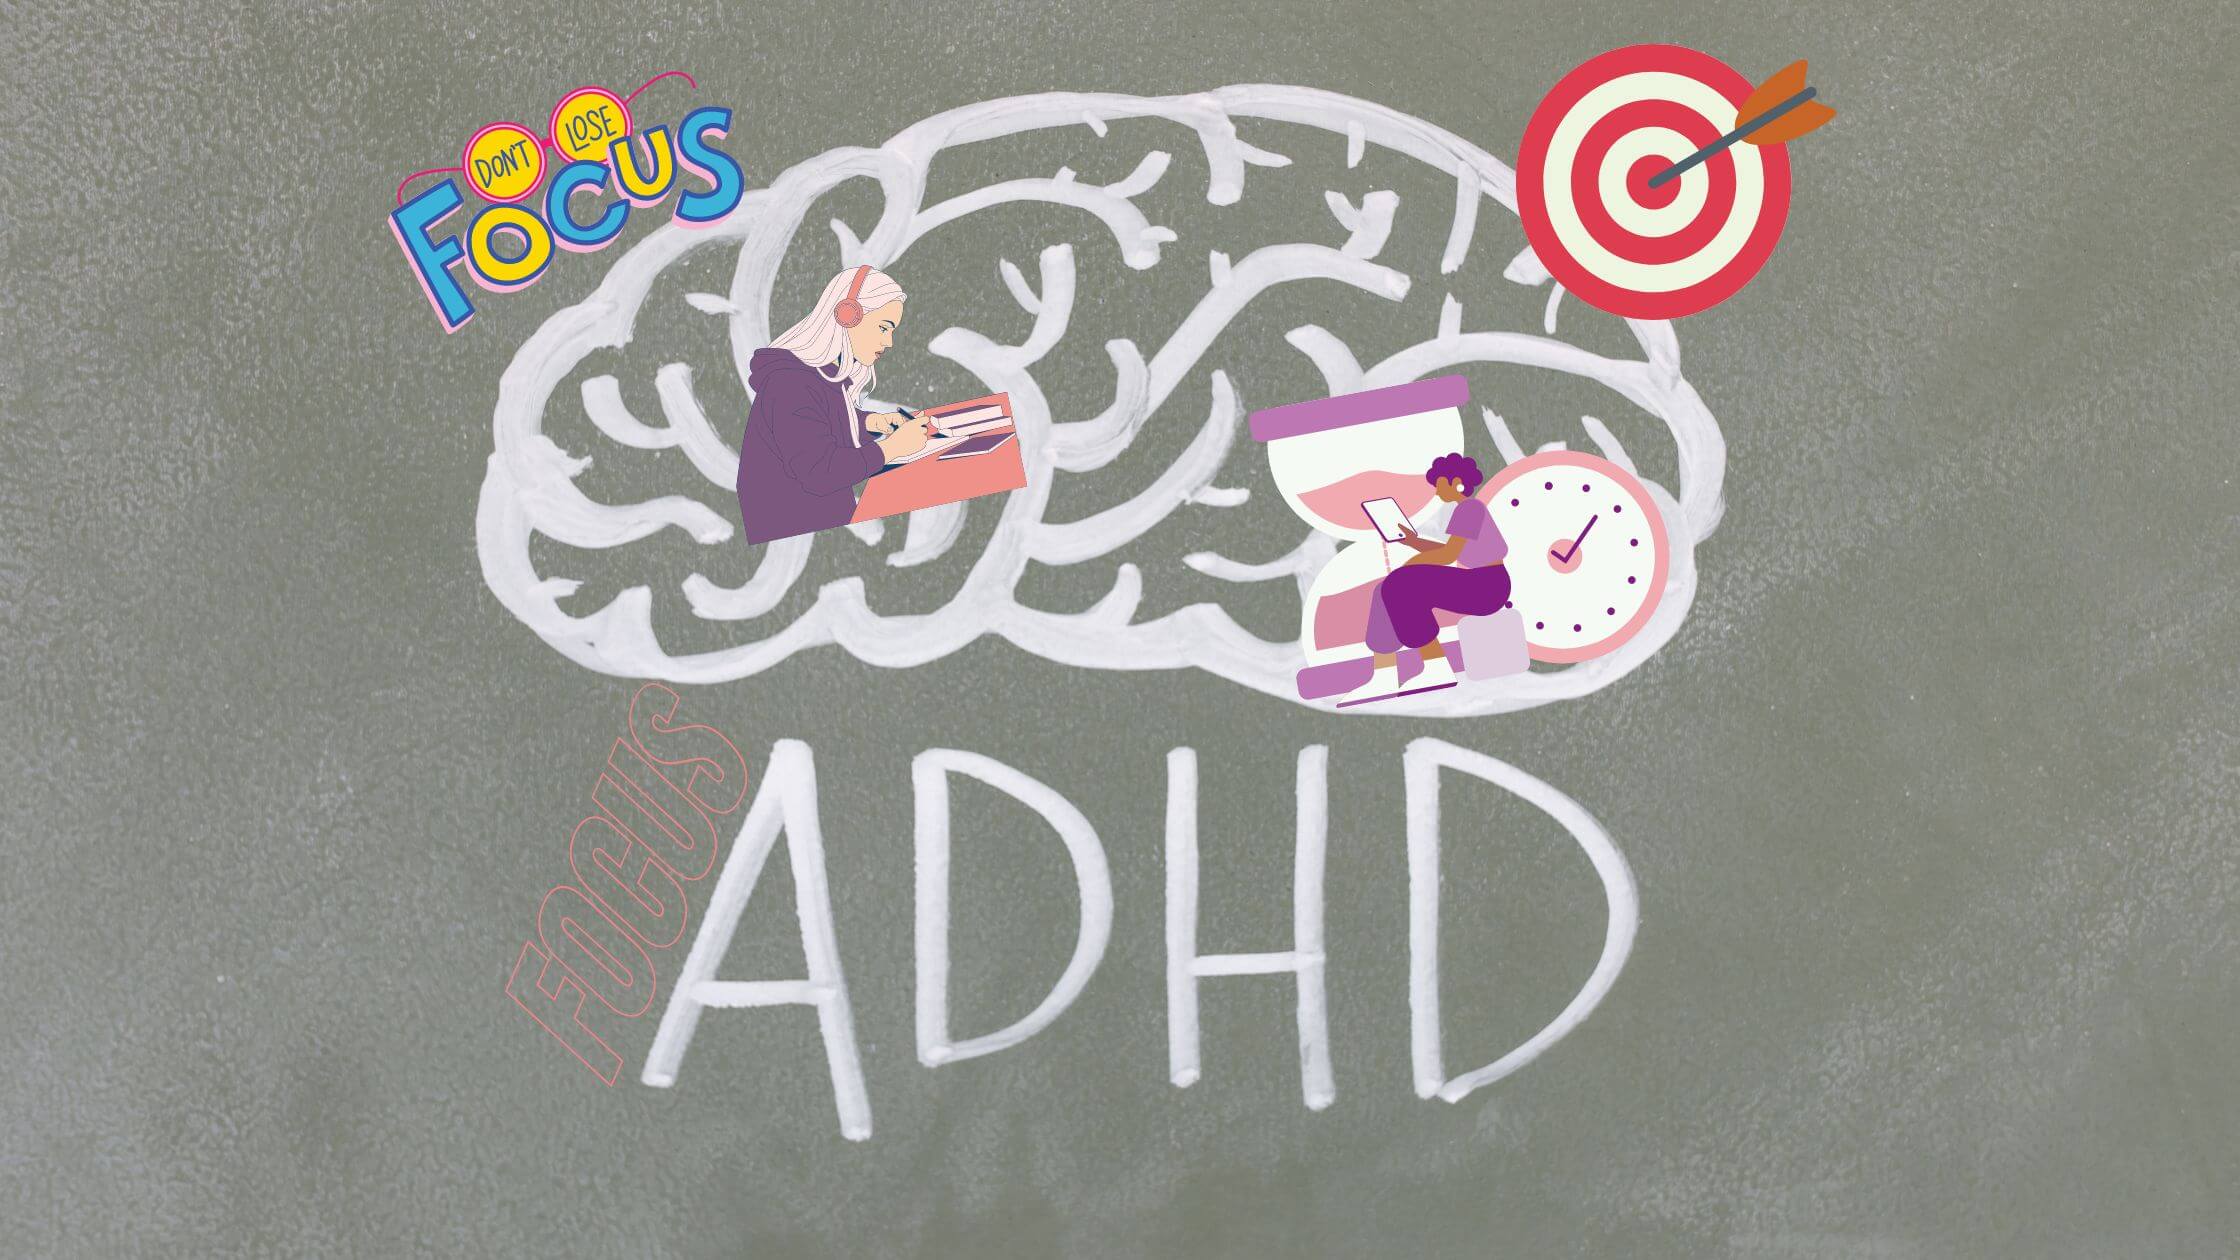 ADHD Graphic w/ Distracting Elements